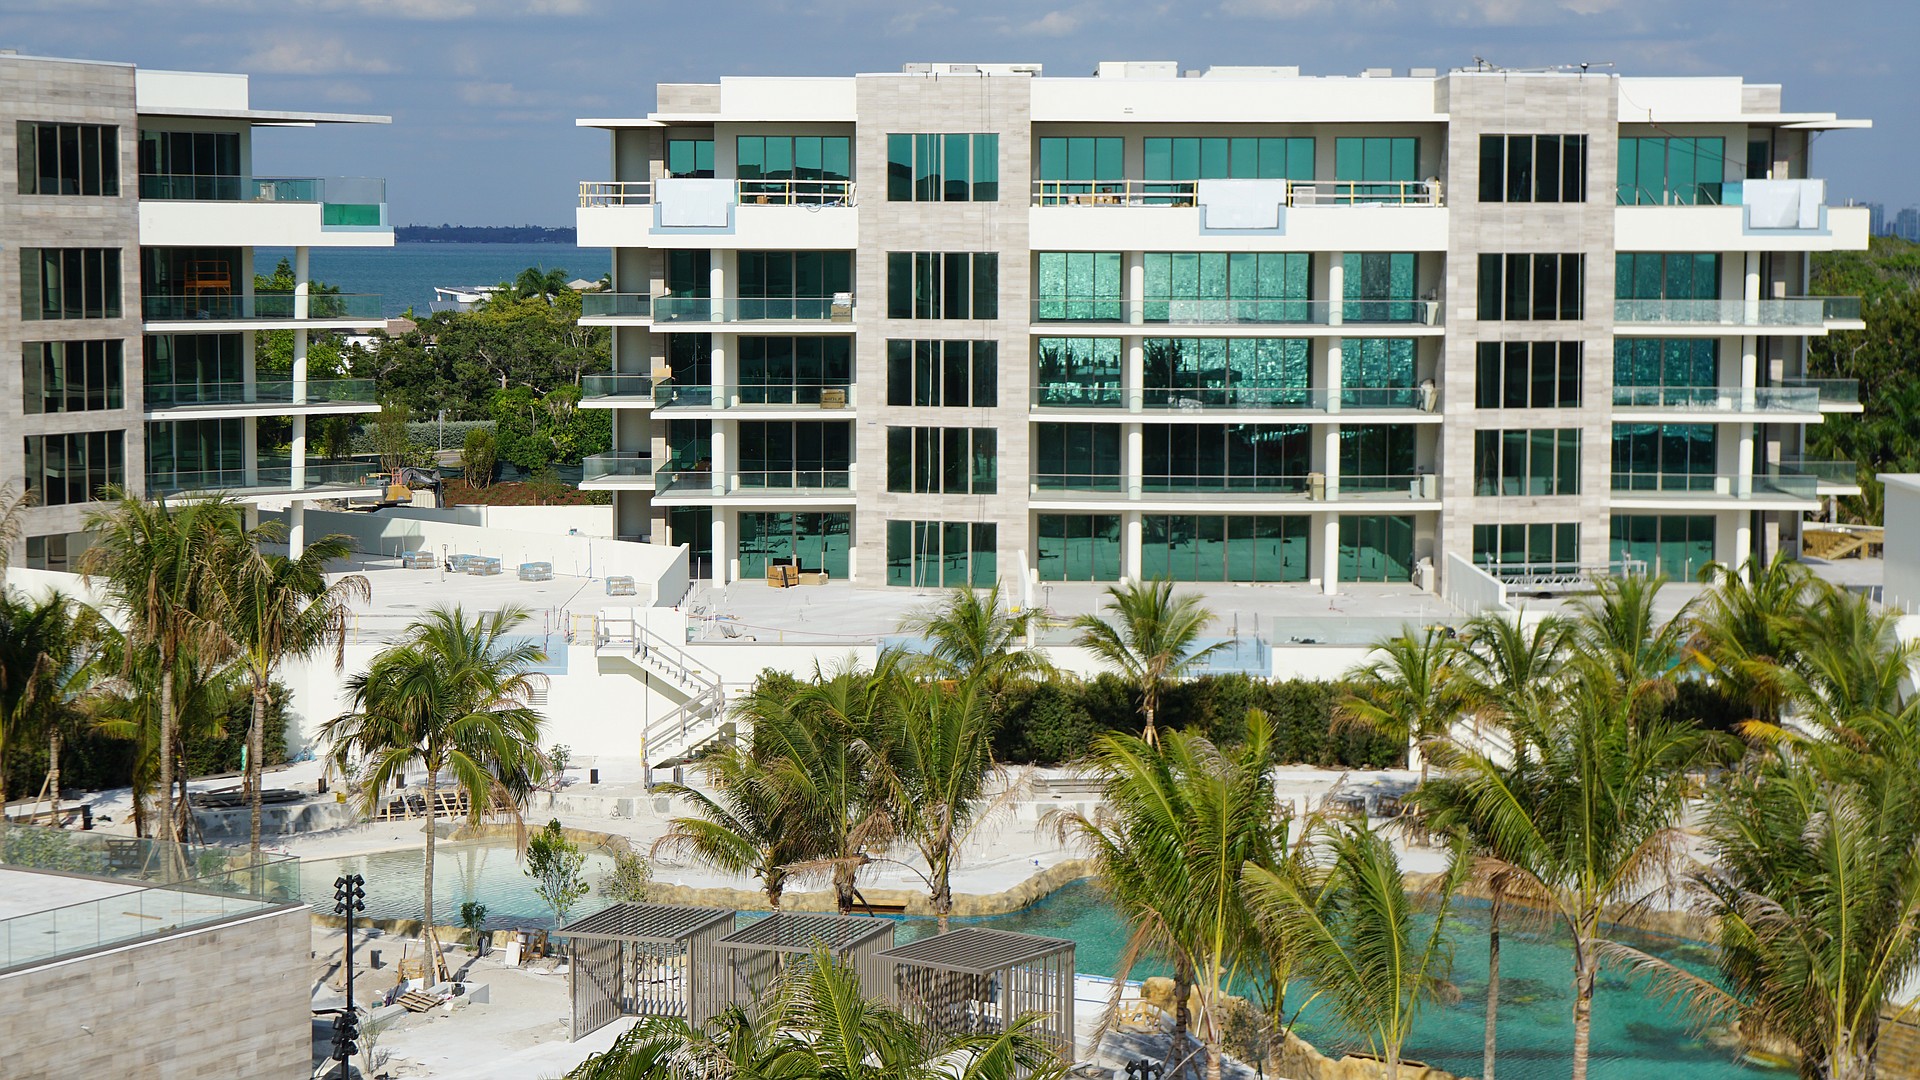 The St. Regis Longboat Key is scheduled to open this summer.